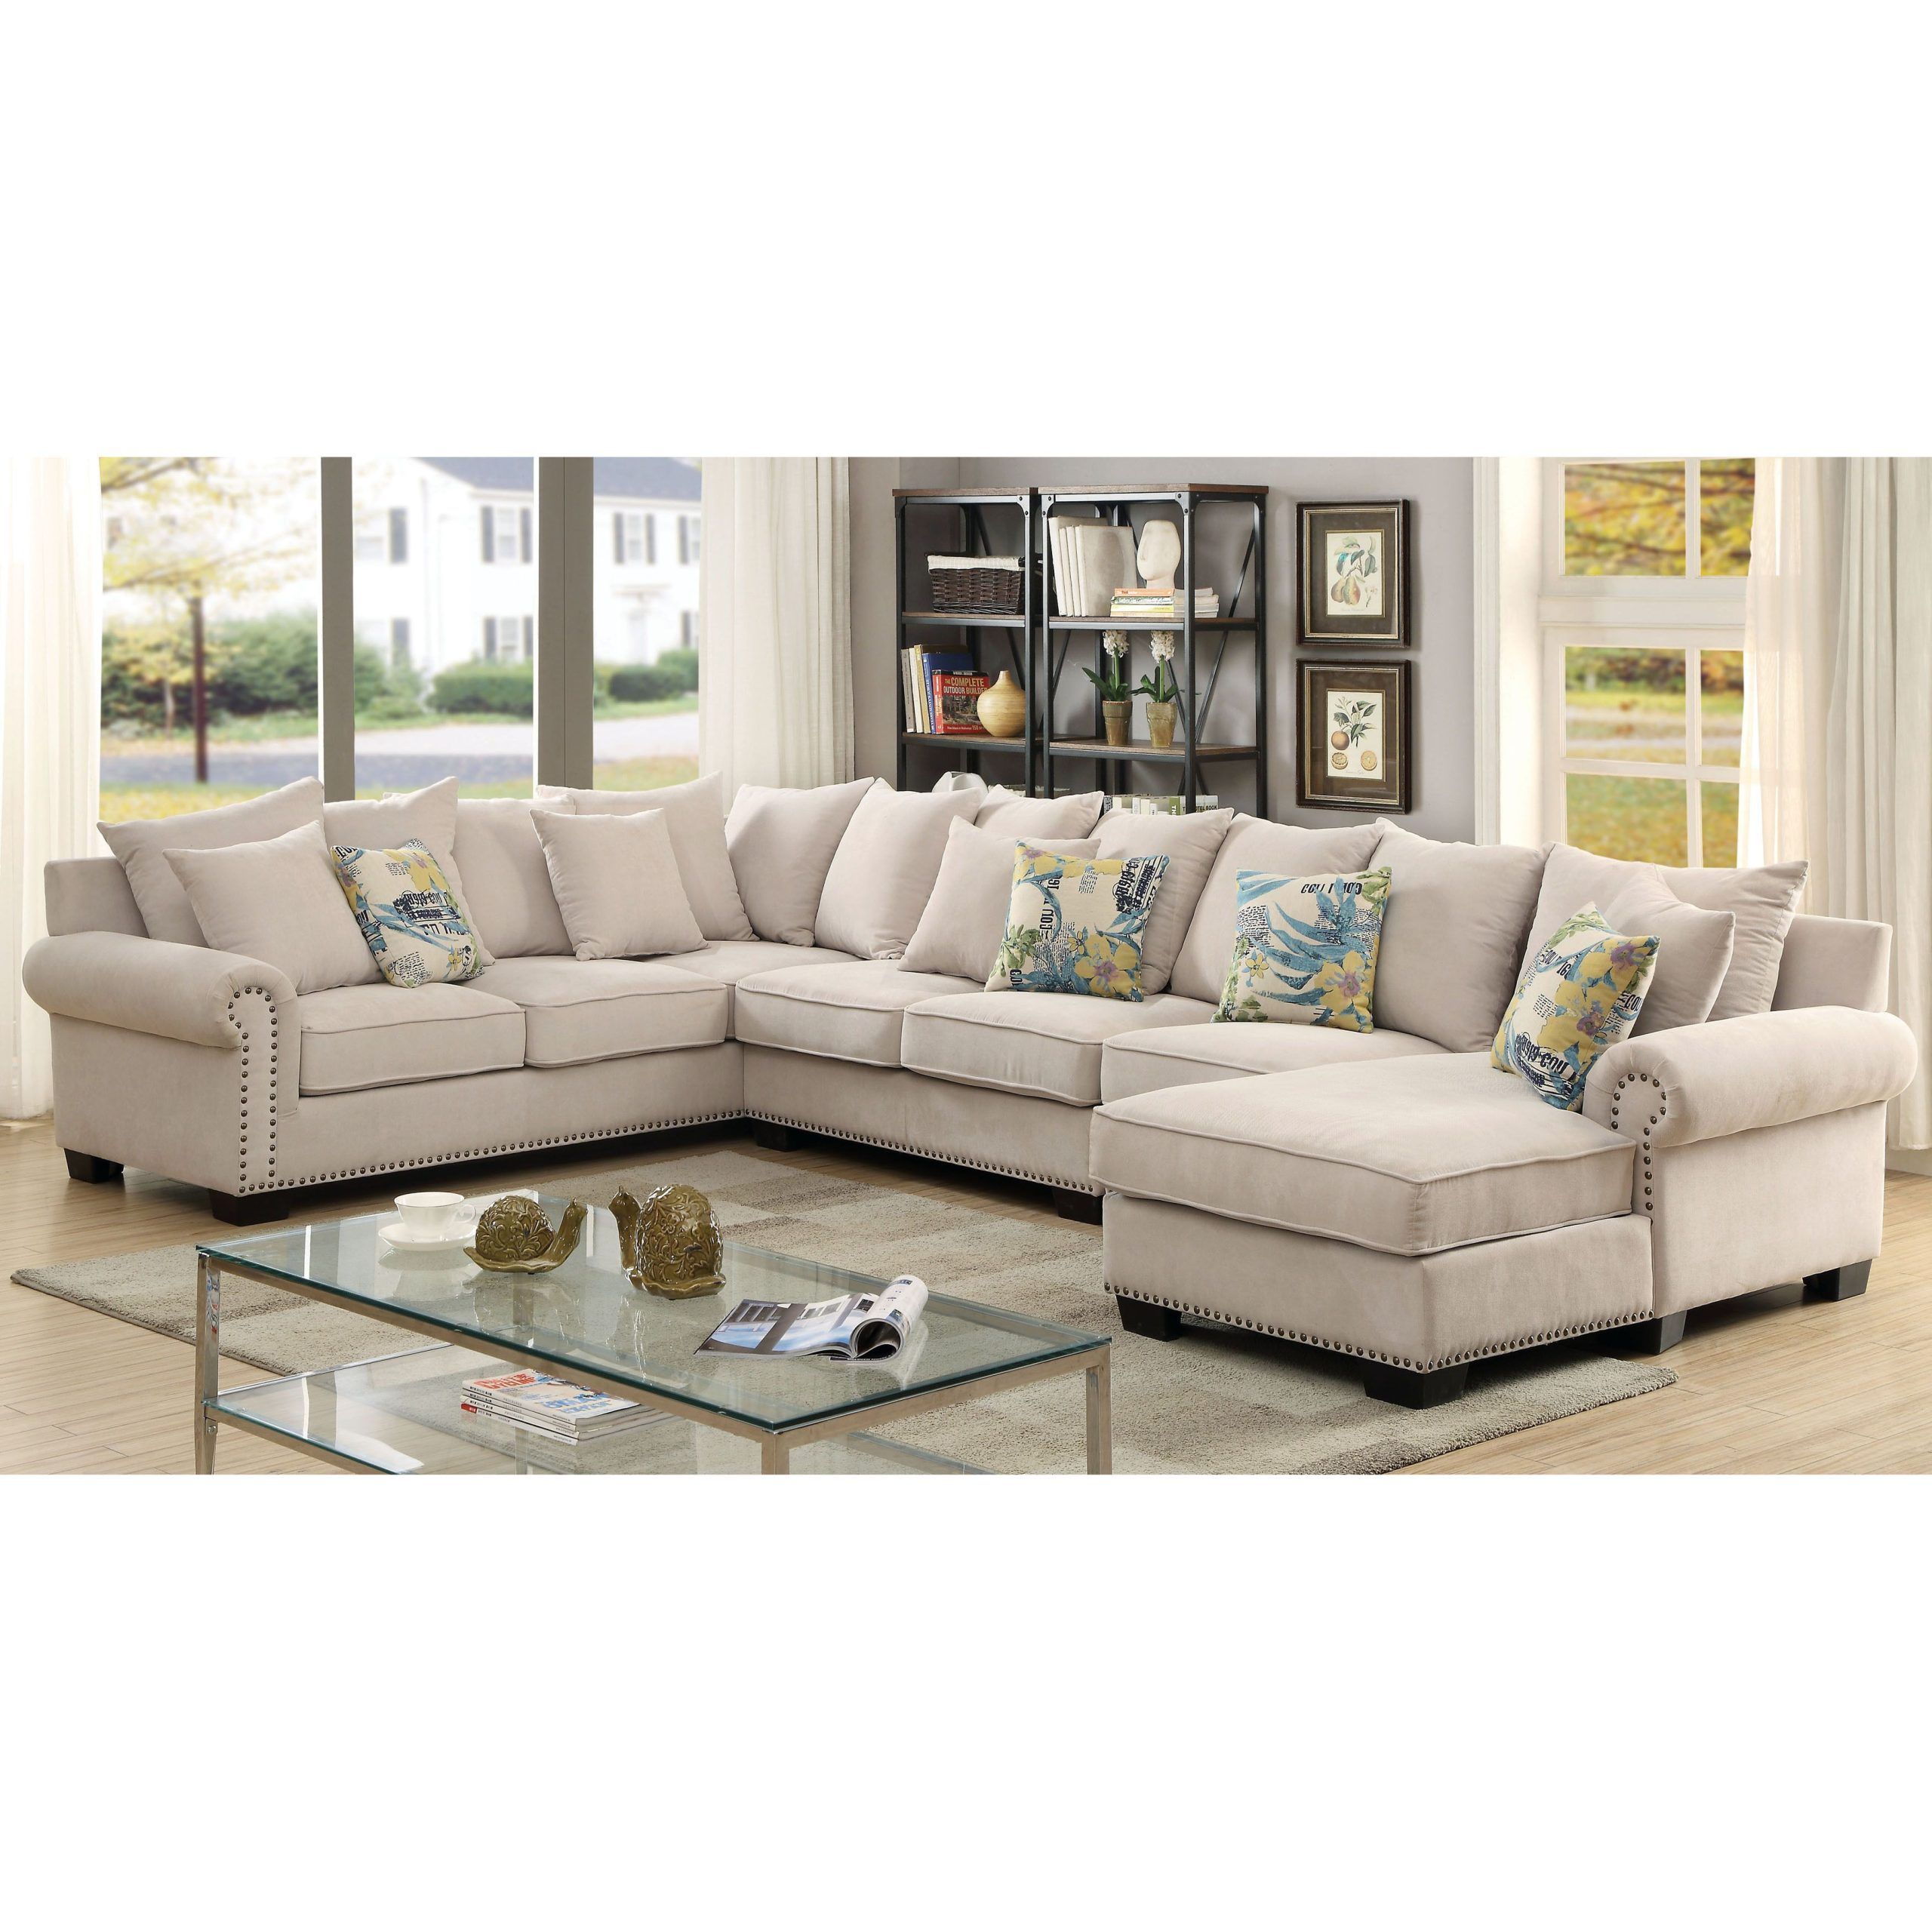 Furniture Of America Riti Contemporary Beige Sectional – On Sale Intended For U Shaped Couches In Beige (Gallery 14 of 20)